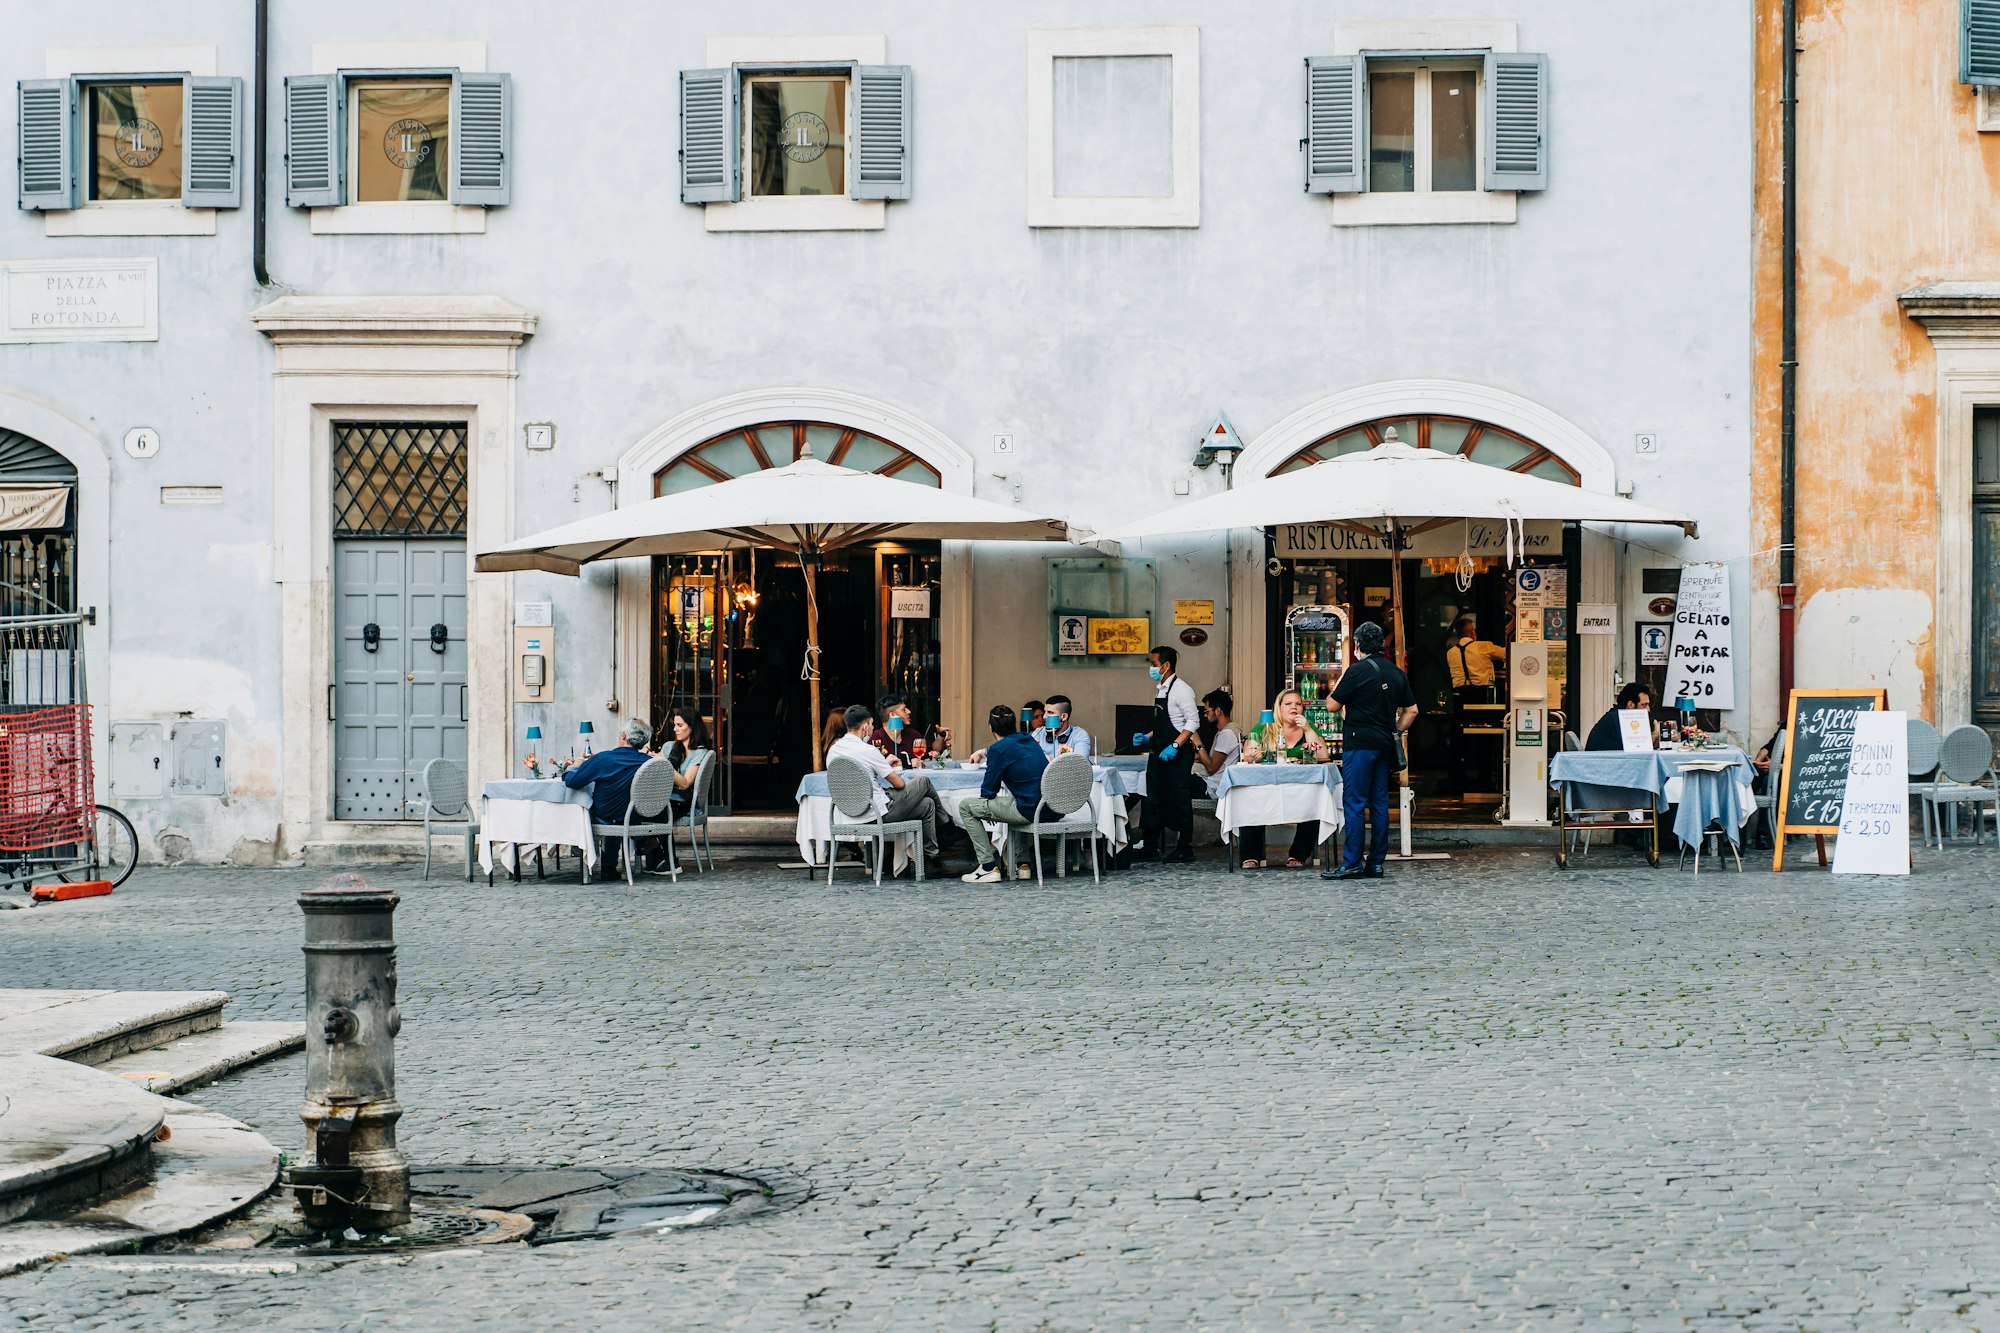 Tourists and locals enjoying a meal at a typical restaurant in Rome, Italy during the Covid-19 pandemic